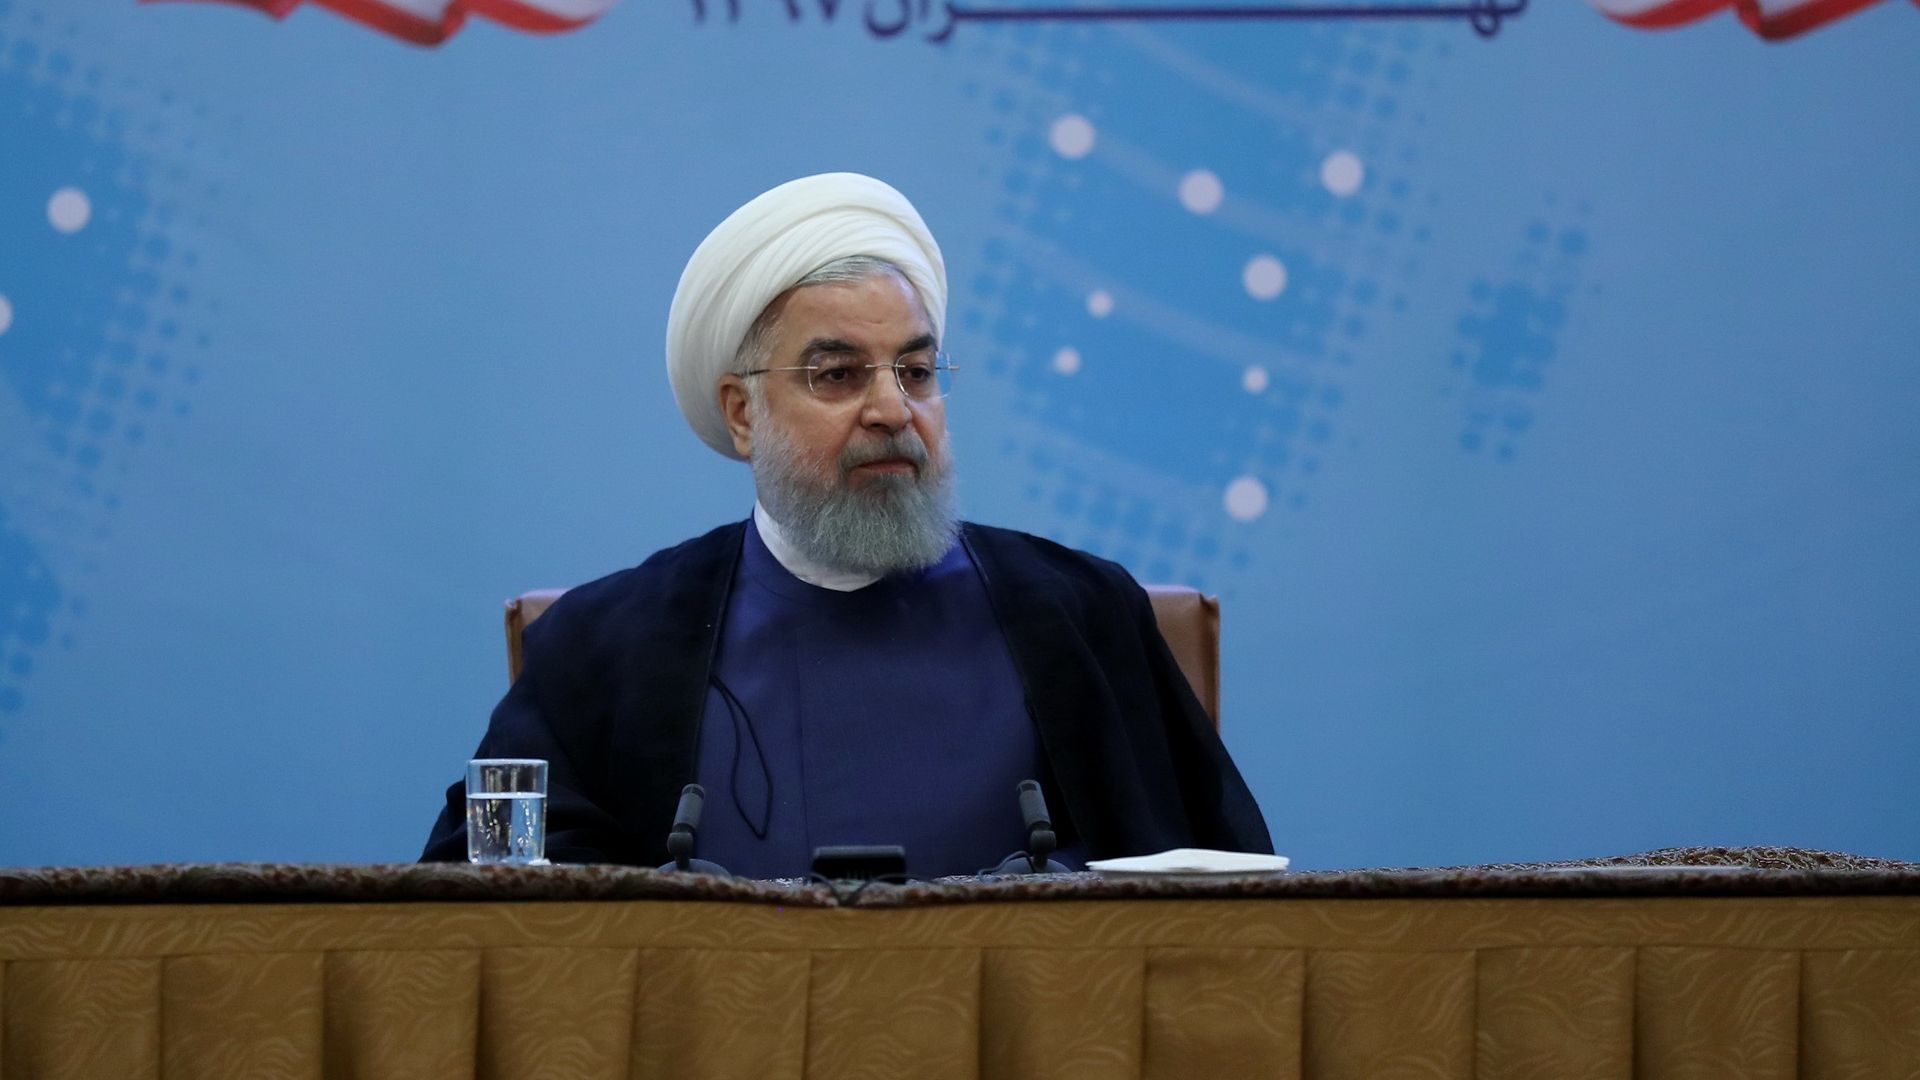  Iranian President Hassan Rouhani speaking to foreign embassies and diplomatic mission representatives of Iran on Sunday. Photo: Iranian Presidency / Handout/Anadolu Agency/Getty Images